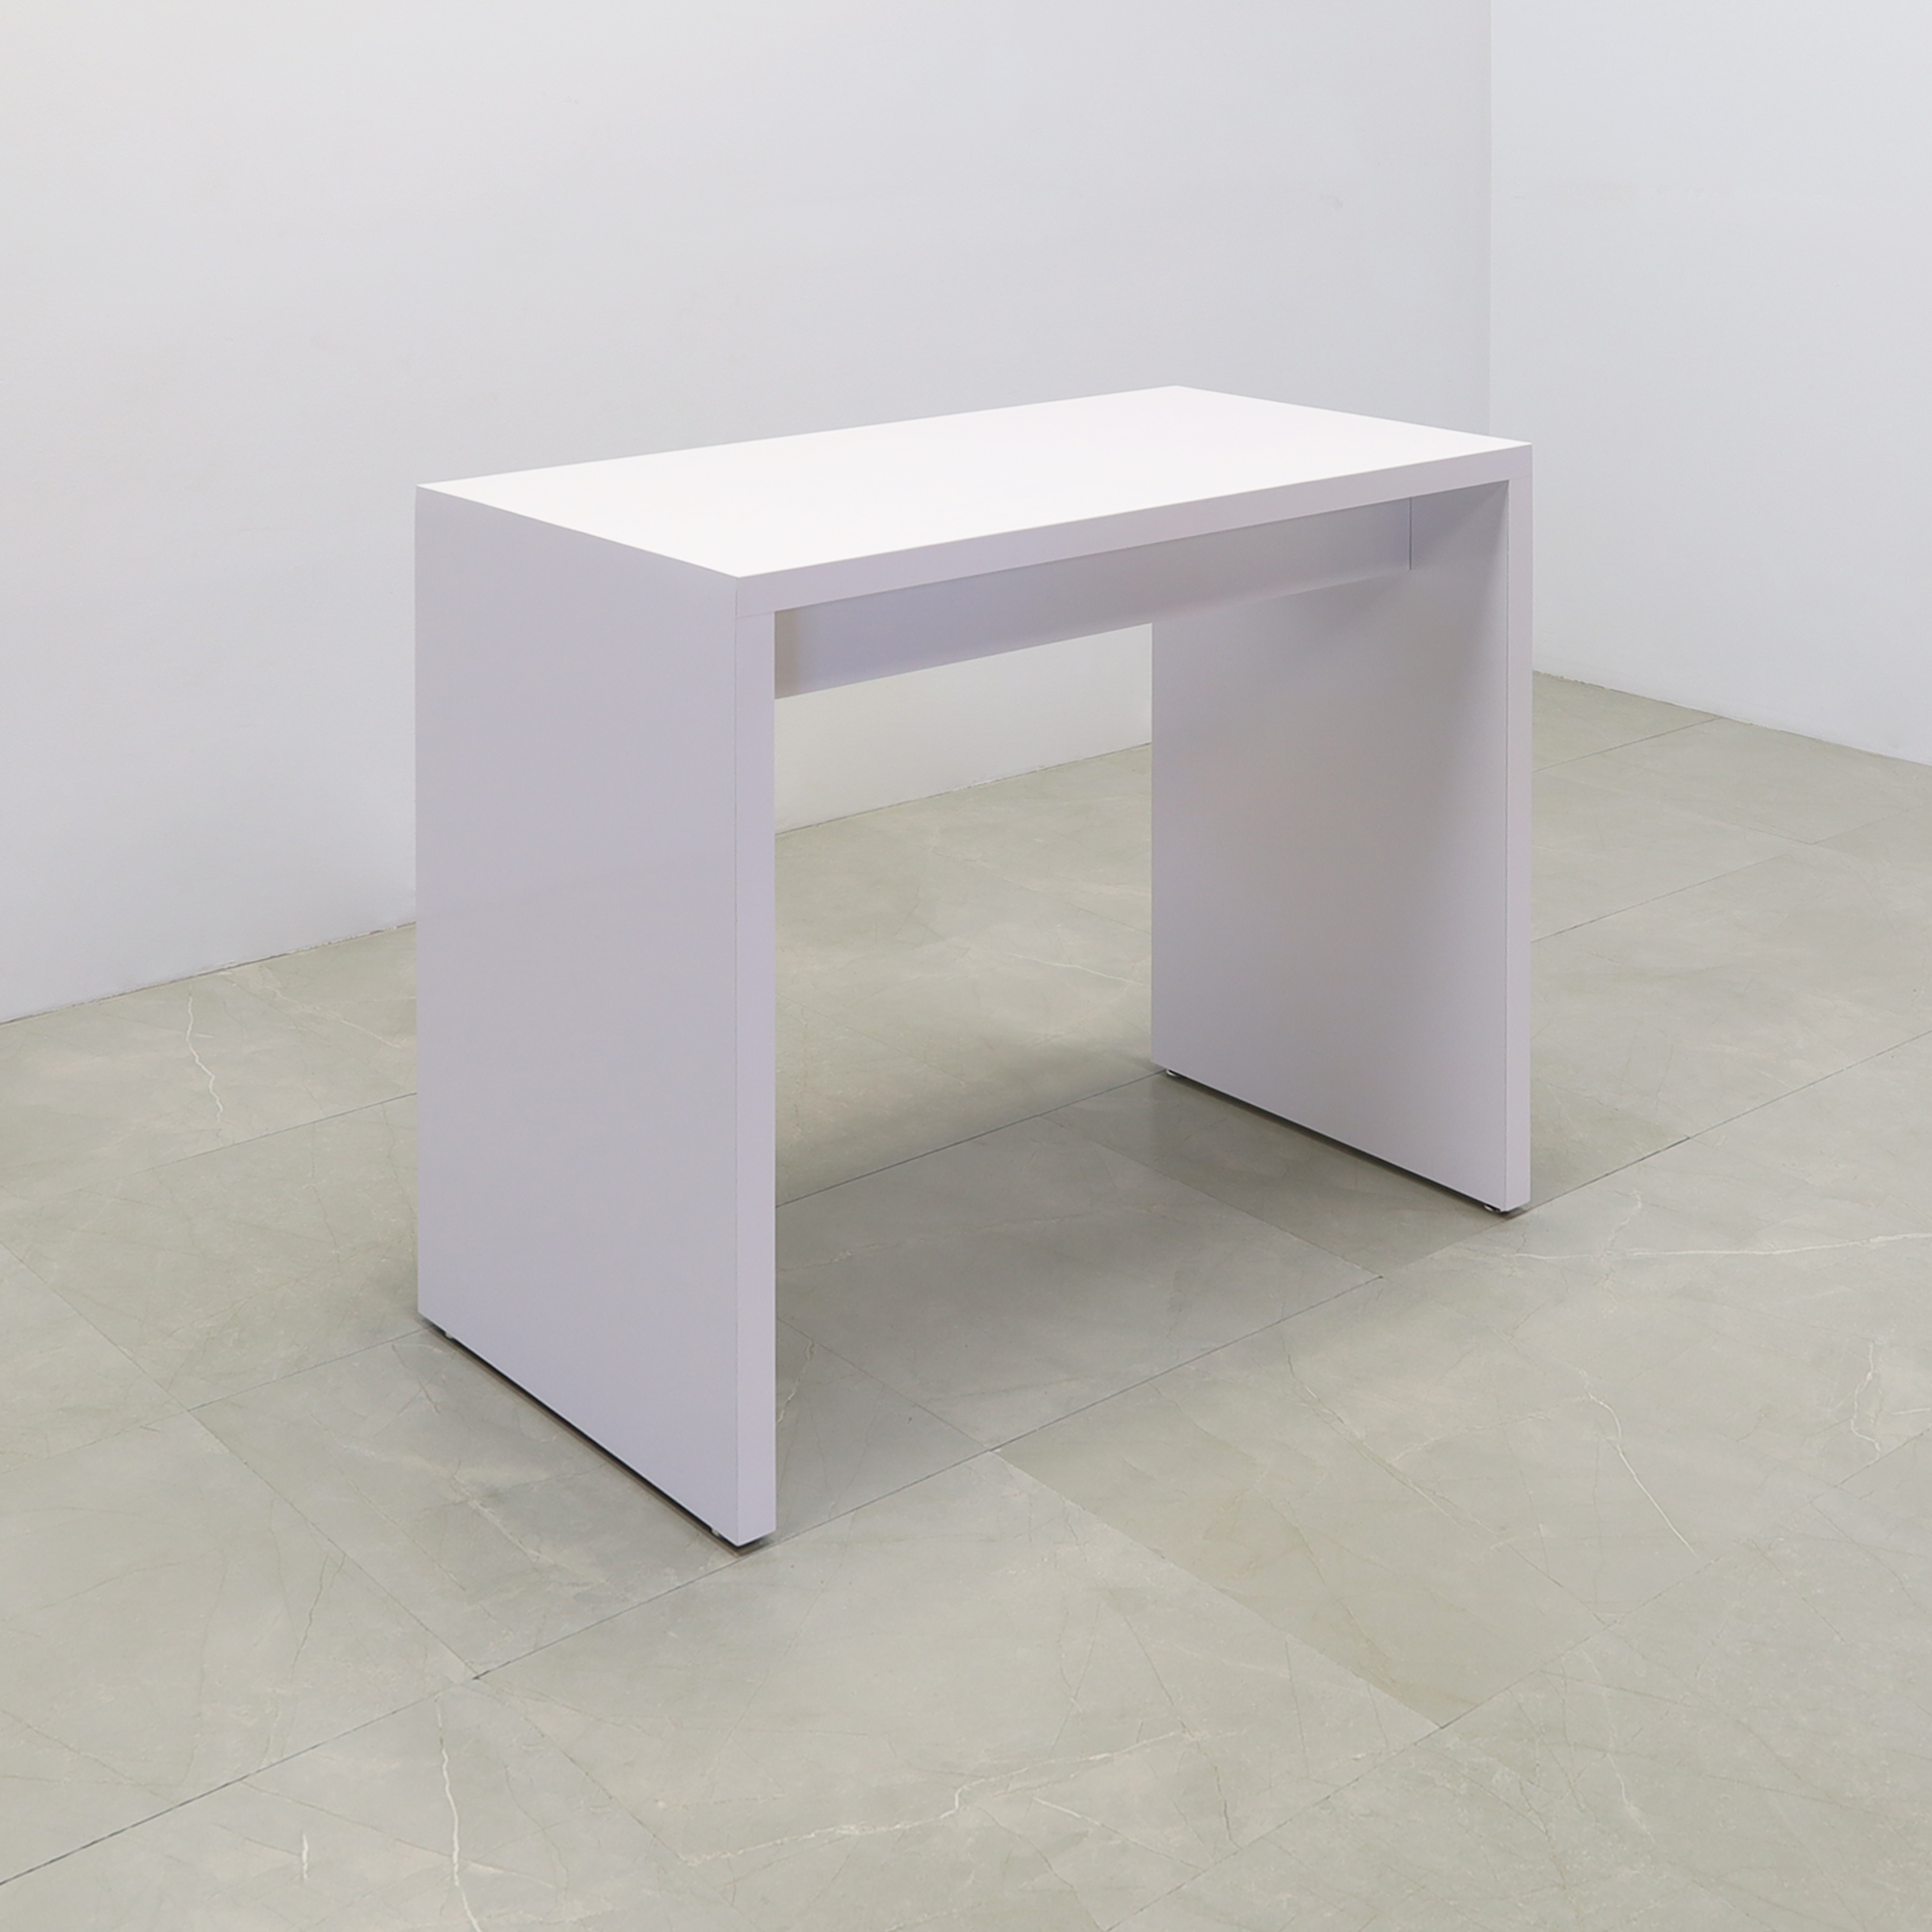 46 inches Ashville Bar Table in White Gloss Laminate shown here.